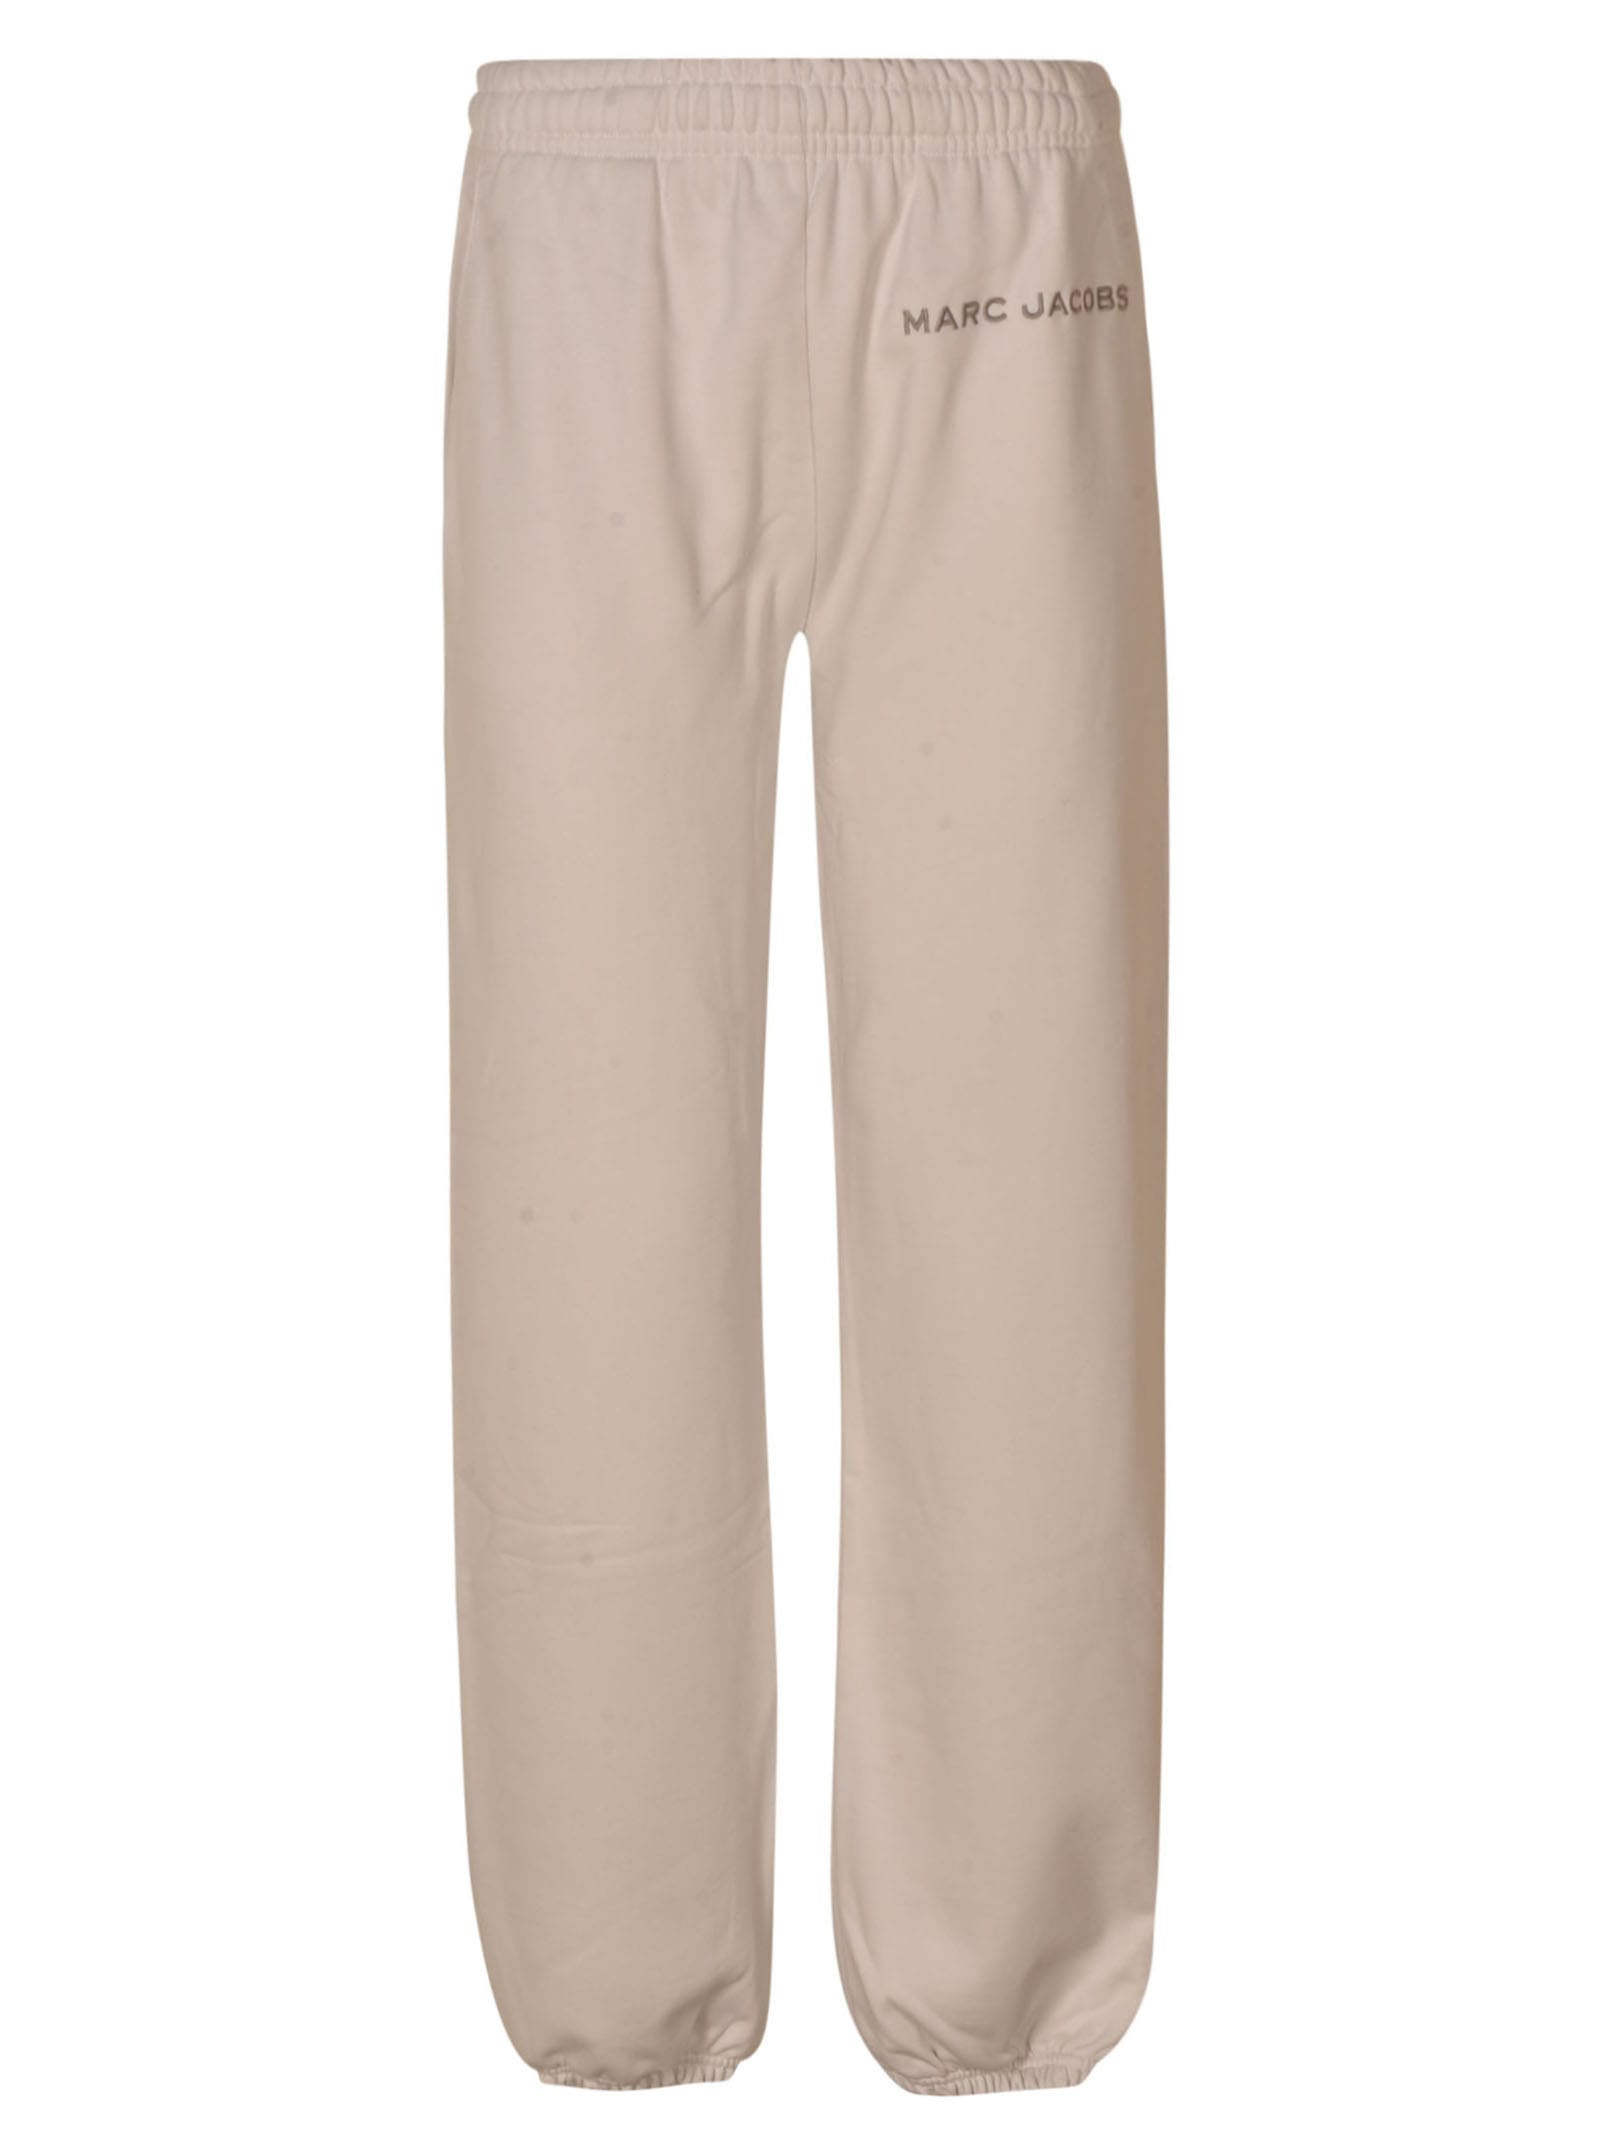 Marc Jacobs Classic Ribbed Logo Track Pants